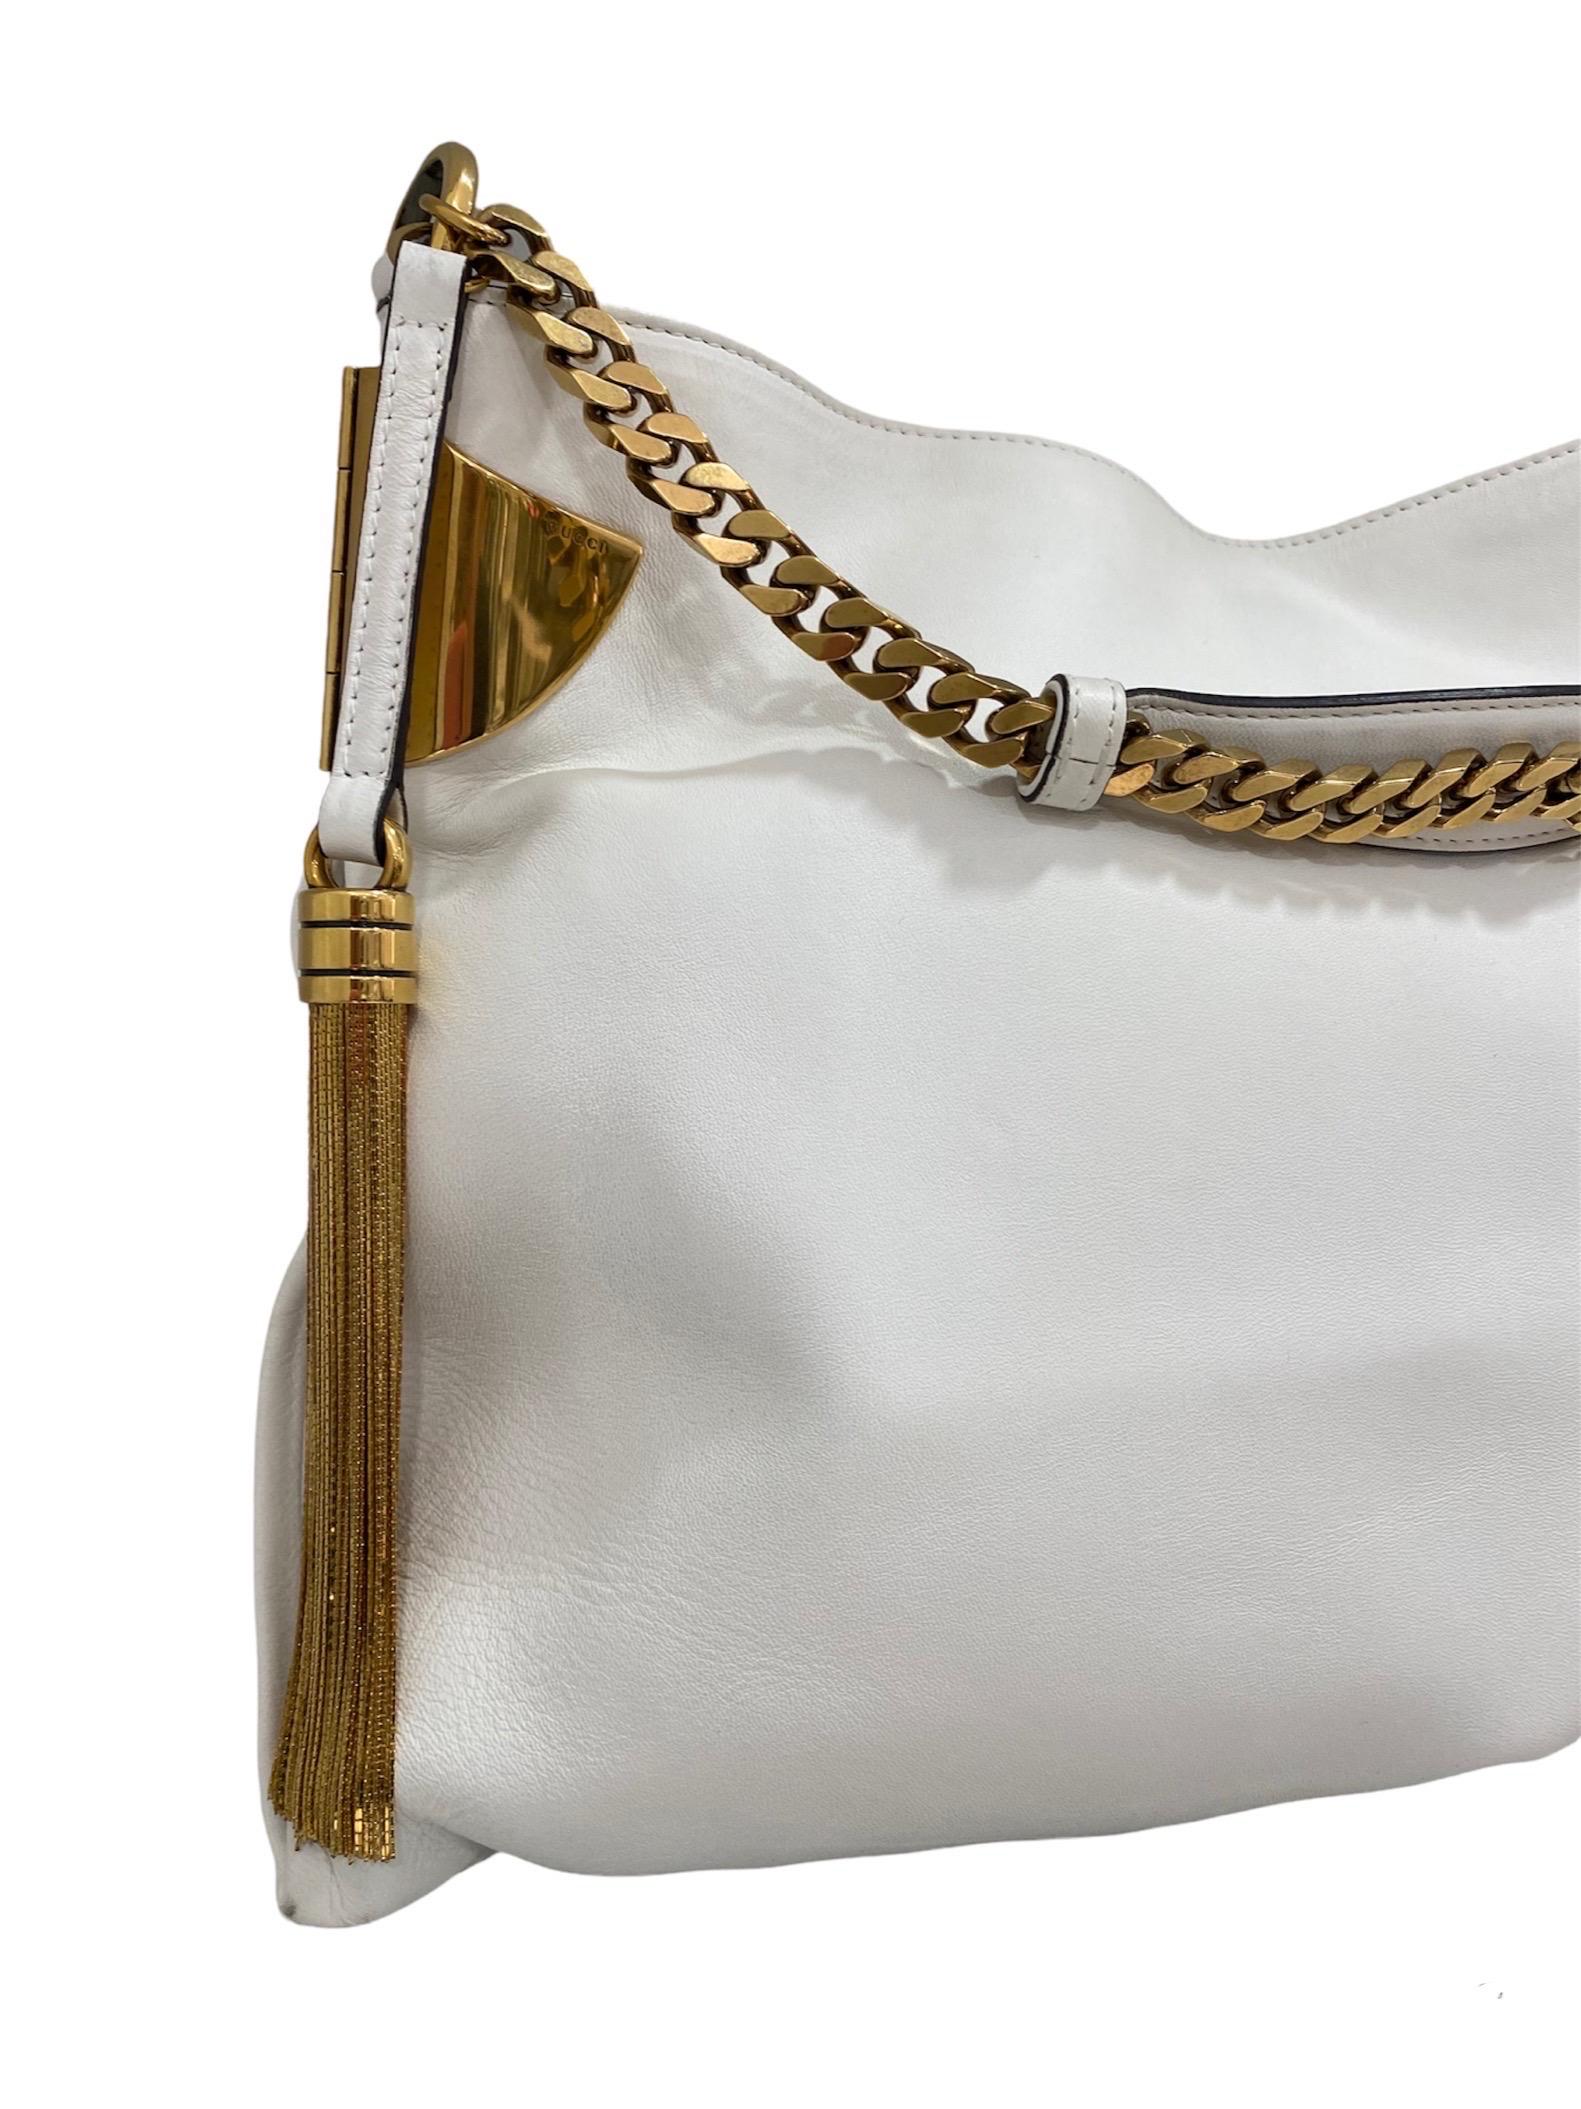 Gucci bag, shoulder model, made of smooth white leather with gold hardware.

Equipped with a central closure with magnetic button, internally lined in beige canvas, very roomy.

Equipped with a chain and leather handle to wear the bag on the